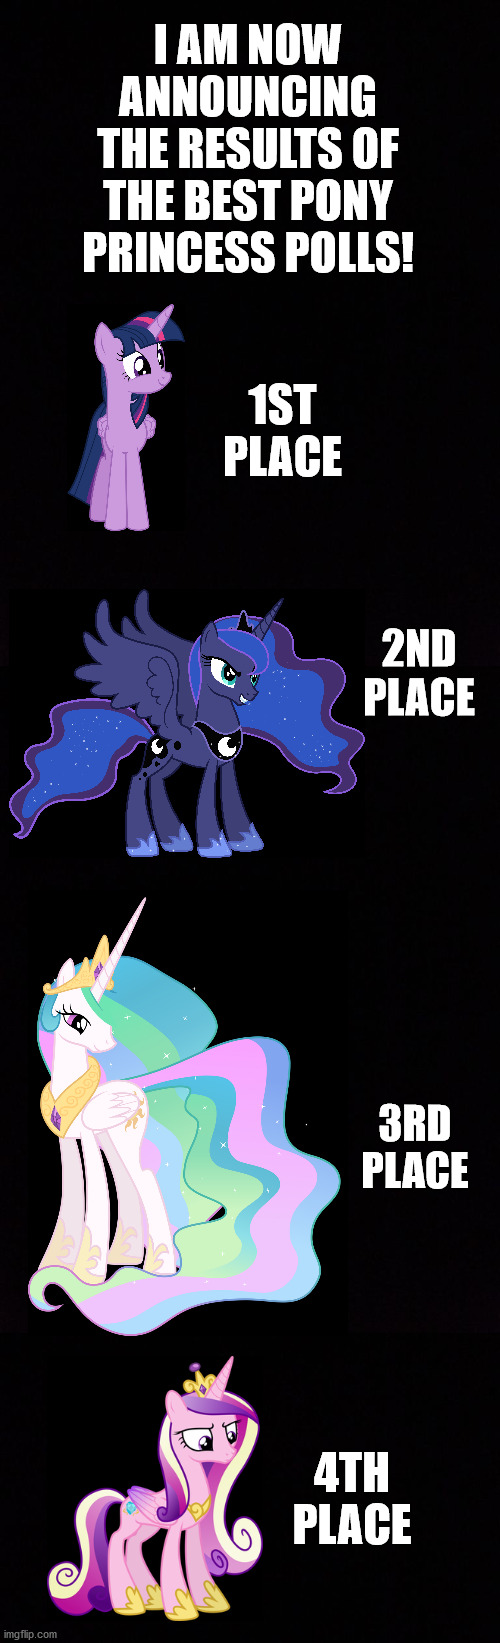 Sorry Princess Cadence, but don't worry, we still love you! | I AM NOW ANNOUNCING THE RESULTS OF THE BEST PONY PRINCESS POLLS! 1ST PLACE; 2ND PLACE; 3RD PLACE; 4TH PLACE | image tagged in mlp,princess,polls | made w/ Imgflip meme maker